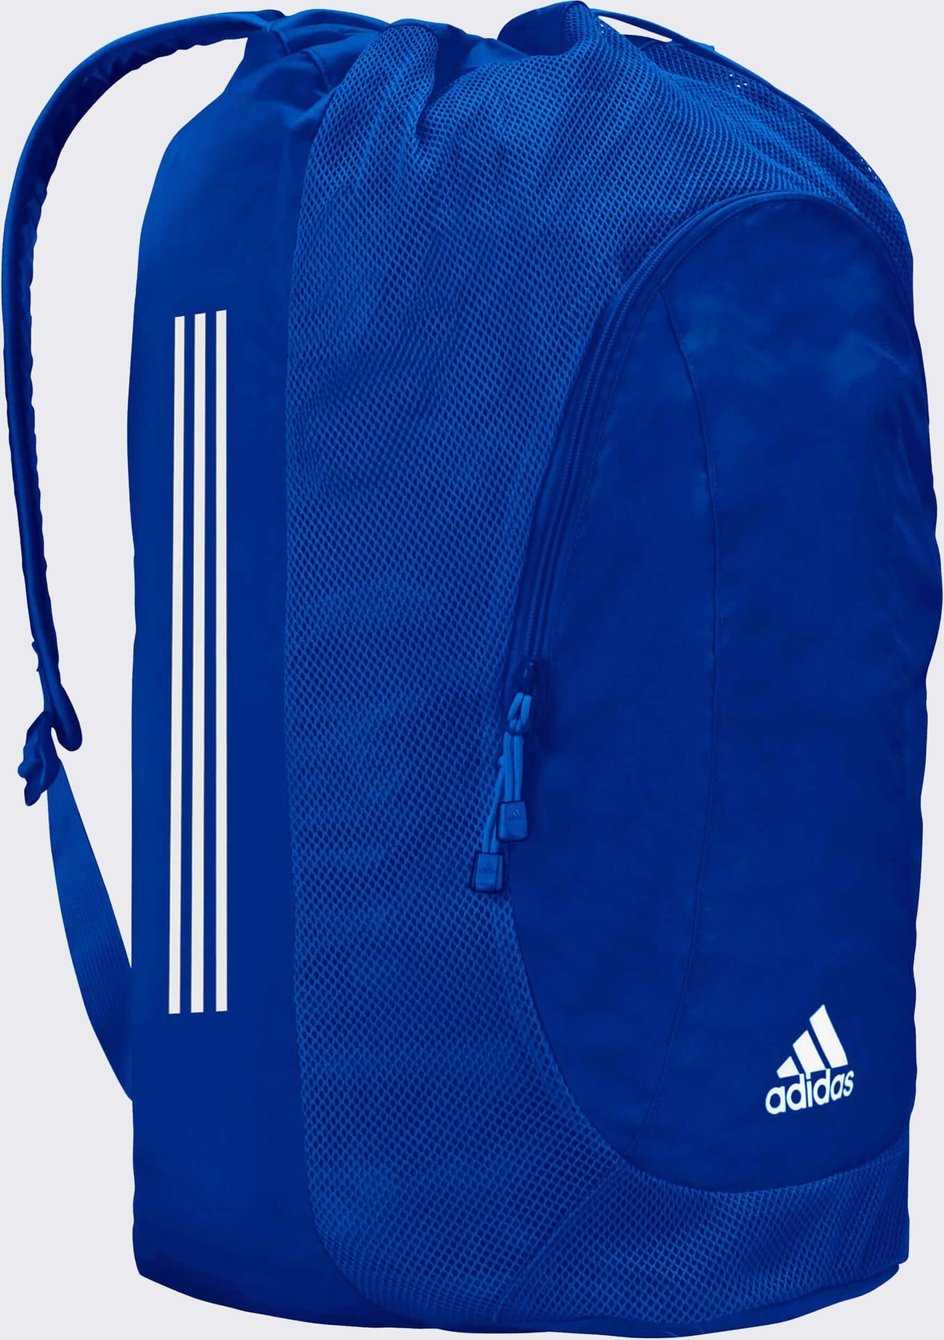 Adidas aA5147204 Wrestling Gear Bag - Royal White - HIT a Double - 1